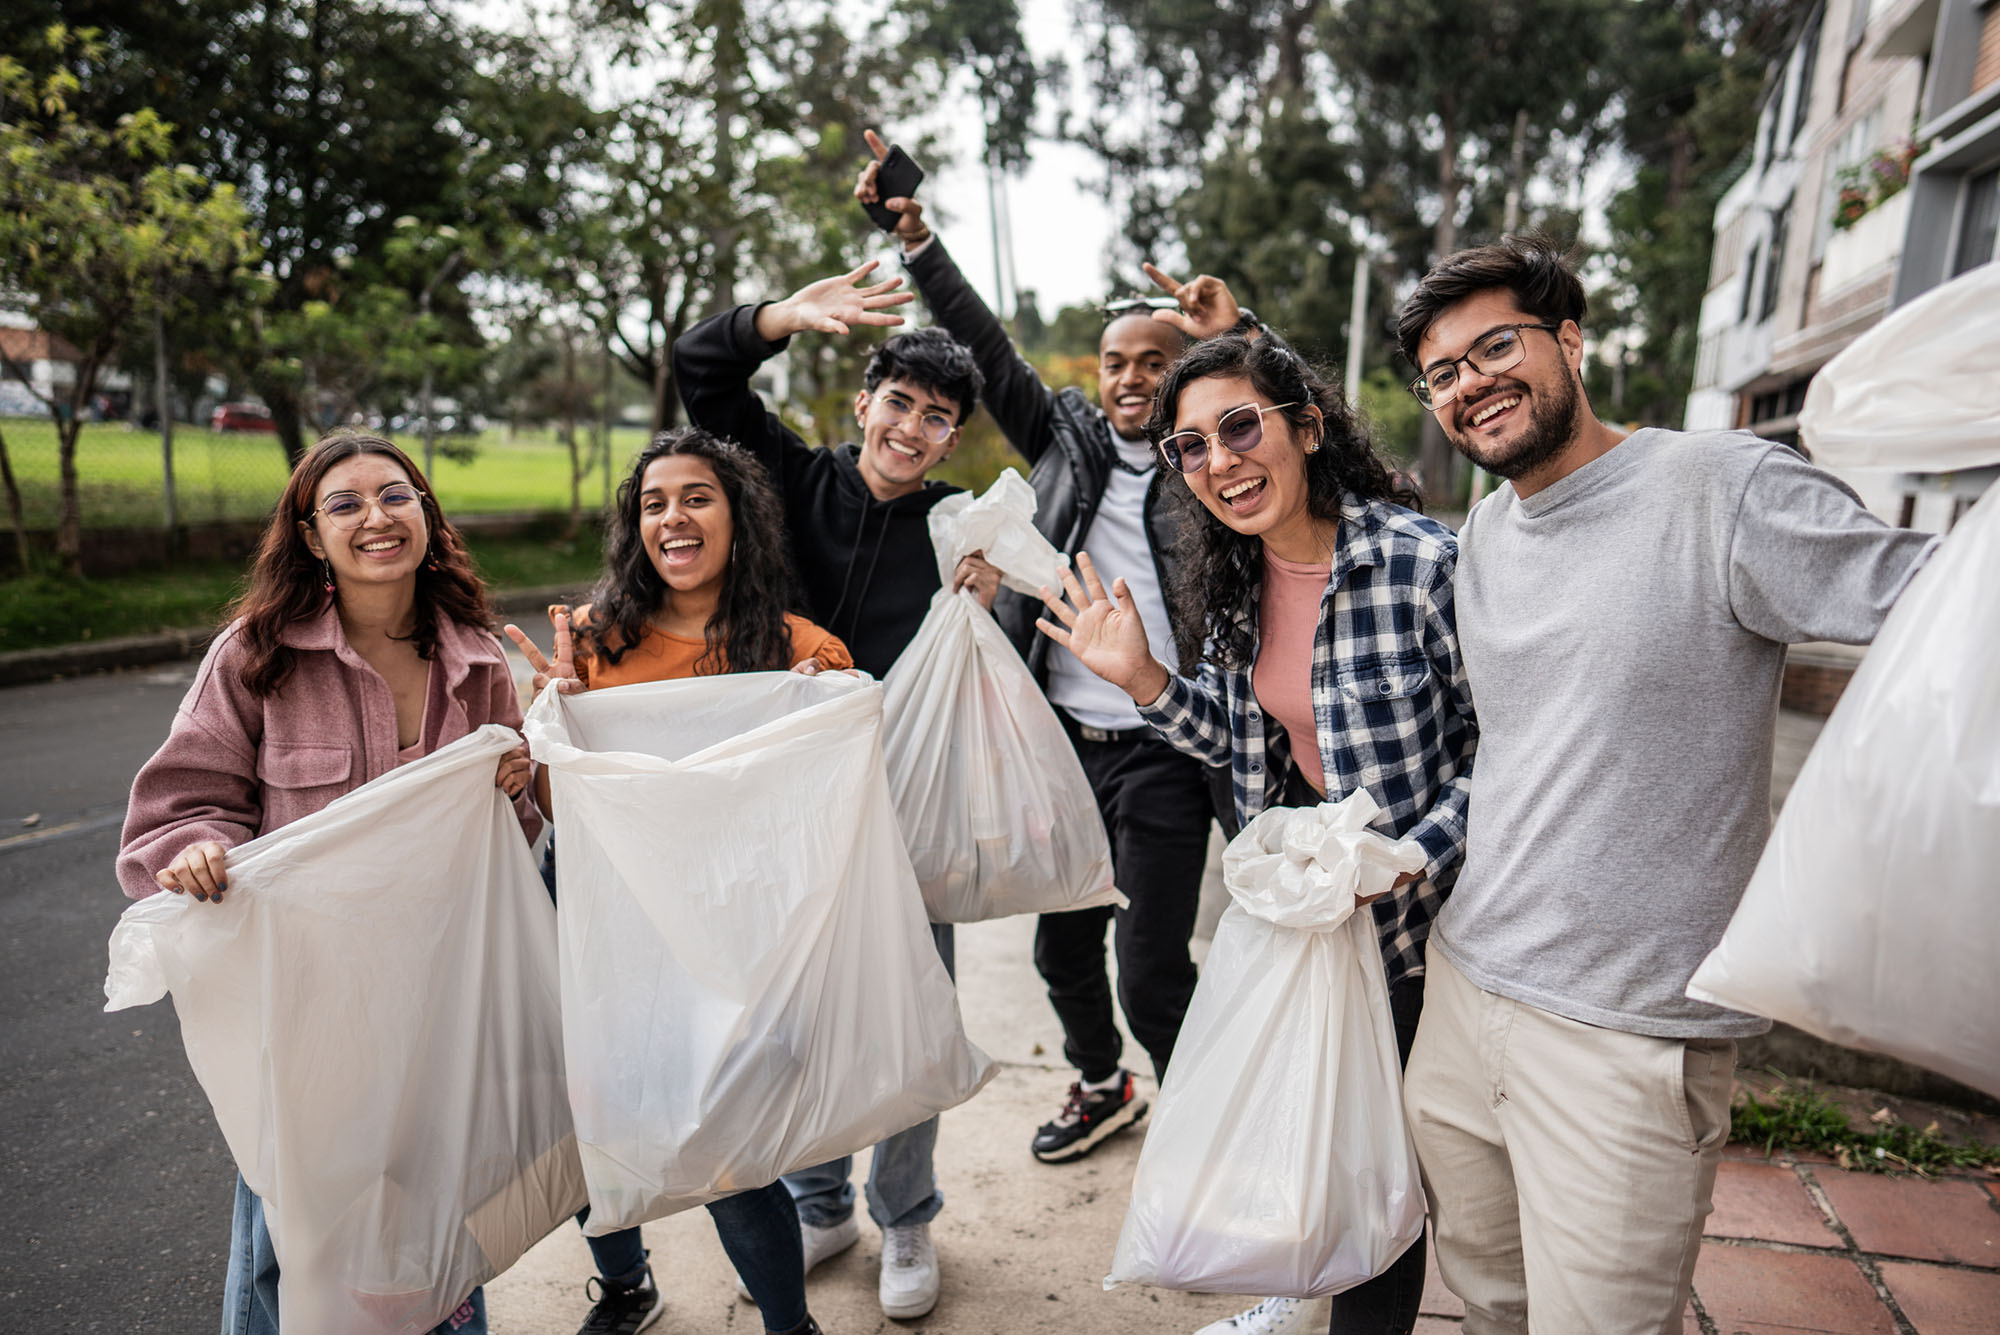 Photo: A picture of people holding up trash bags with items in them